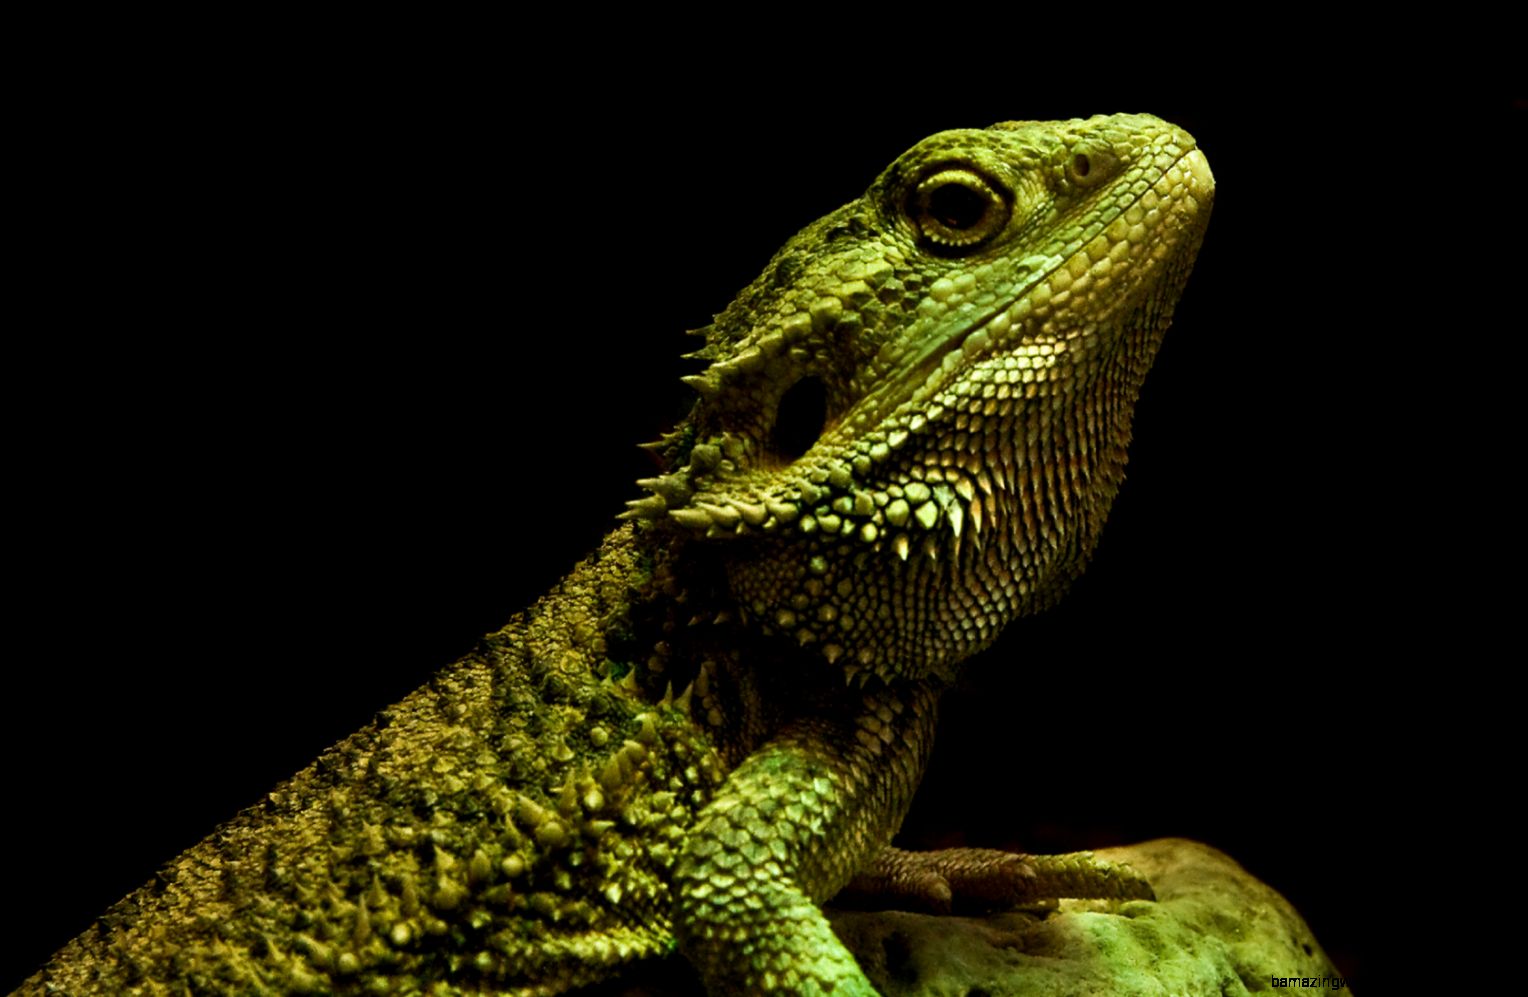 22 Reptile HD Wallpapers Backgrounds Wallpaper Abyss 1528x997